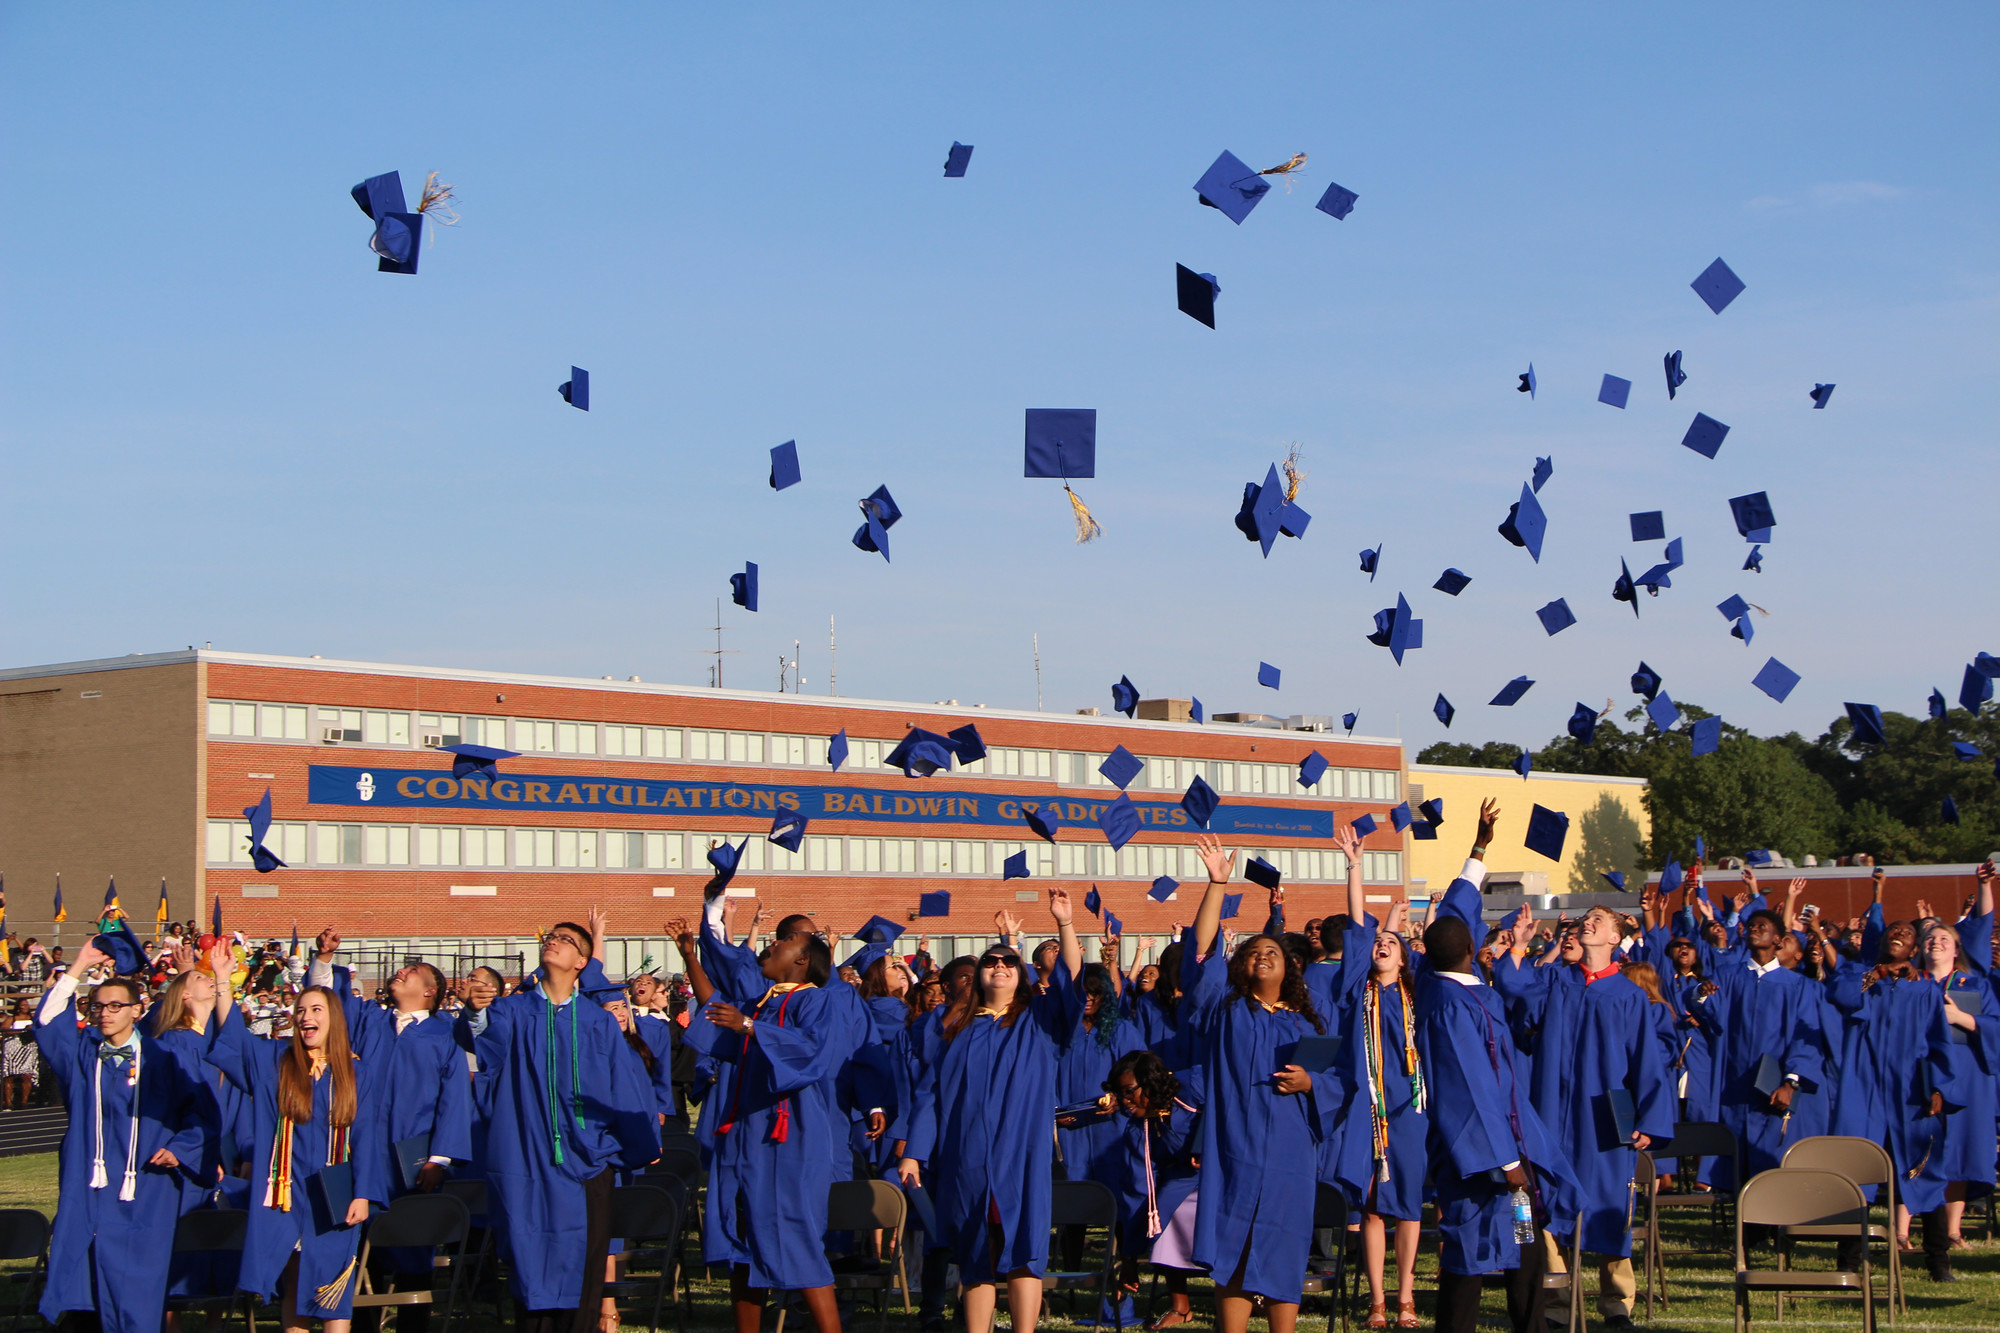 Baldwin High School seniors tossed their mortarboards at their graduation ceremony on June 26.